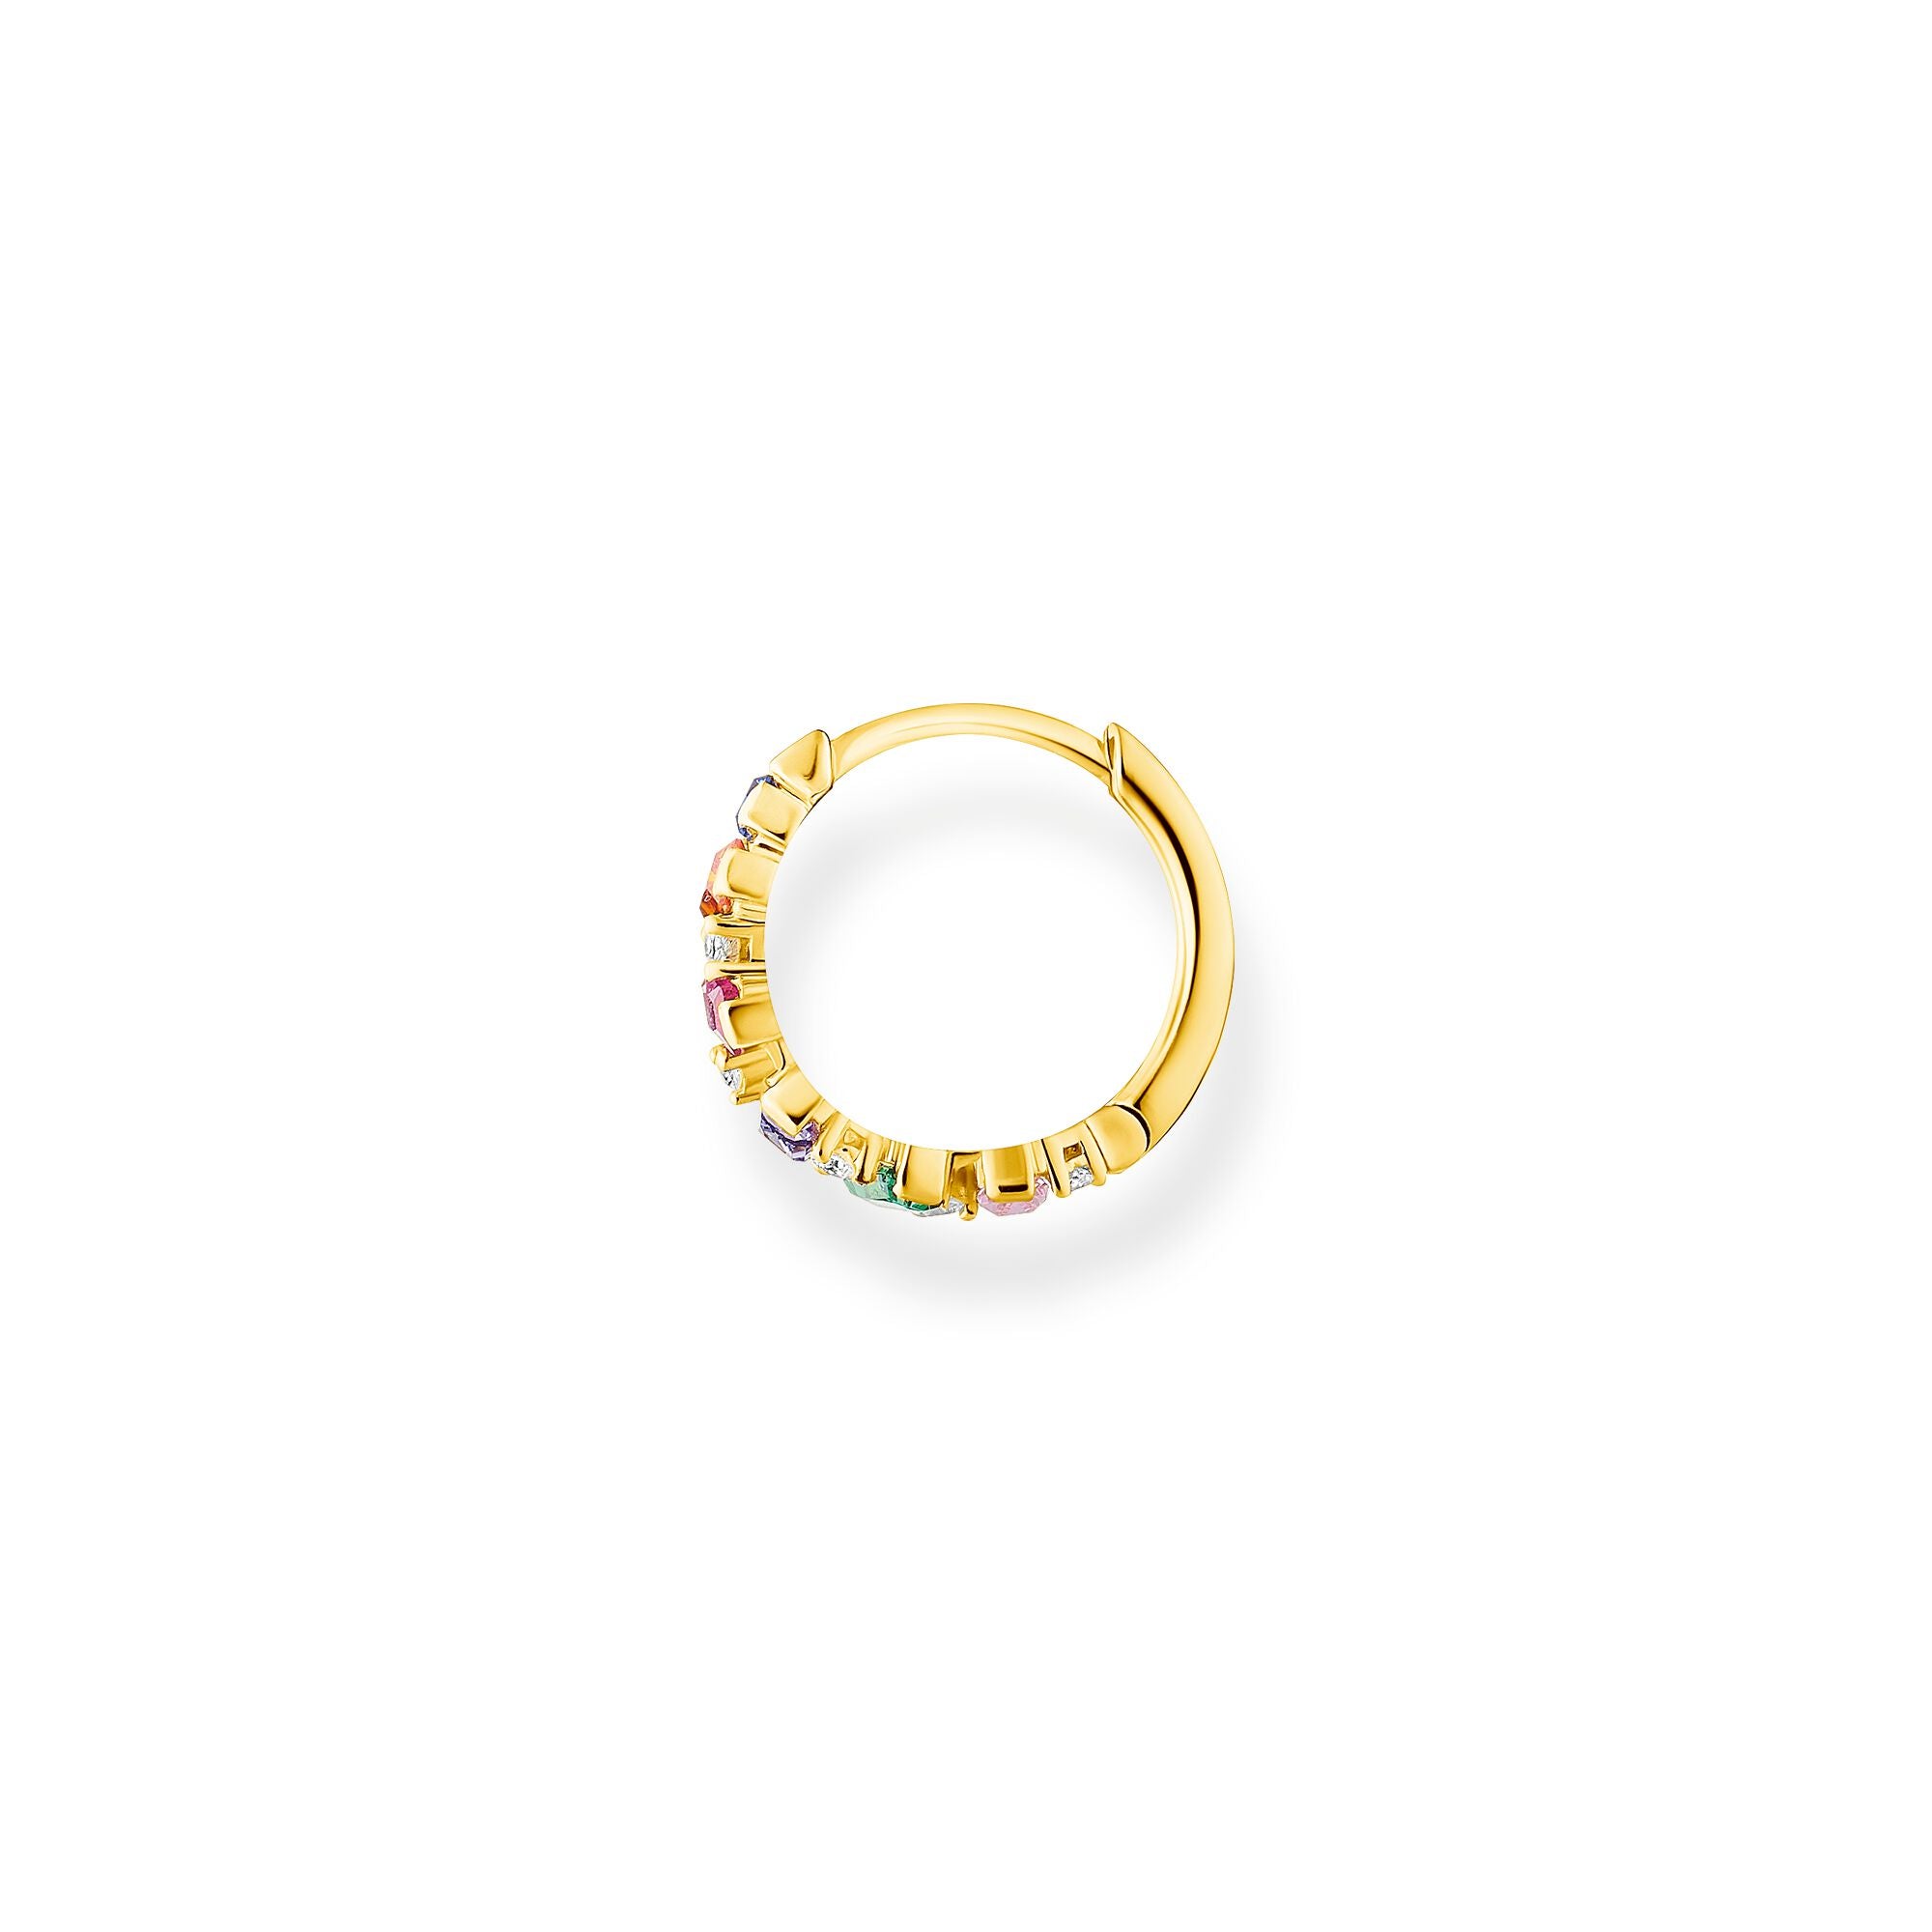 Thomas Sabo 18k yellow gold plated single hoop earring with multiple coloured baguette gemstones